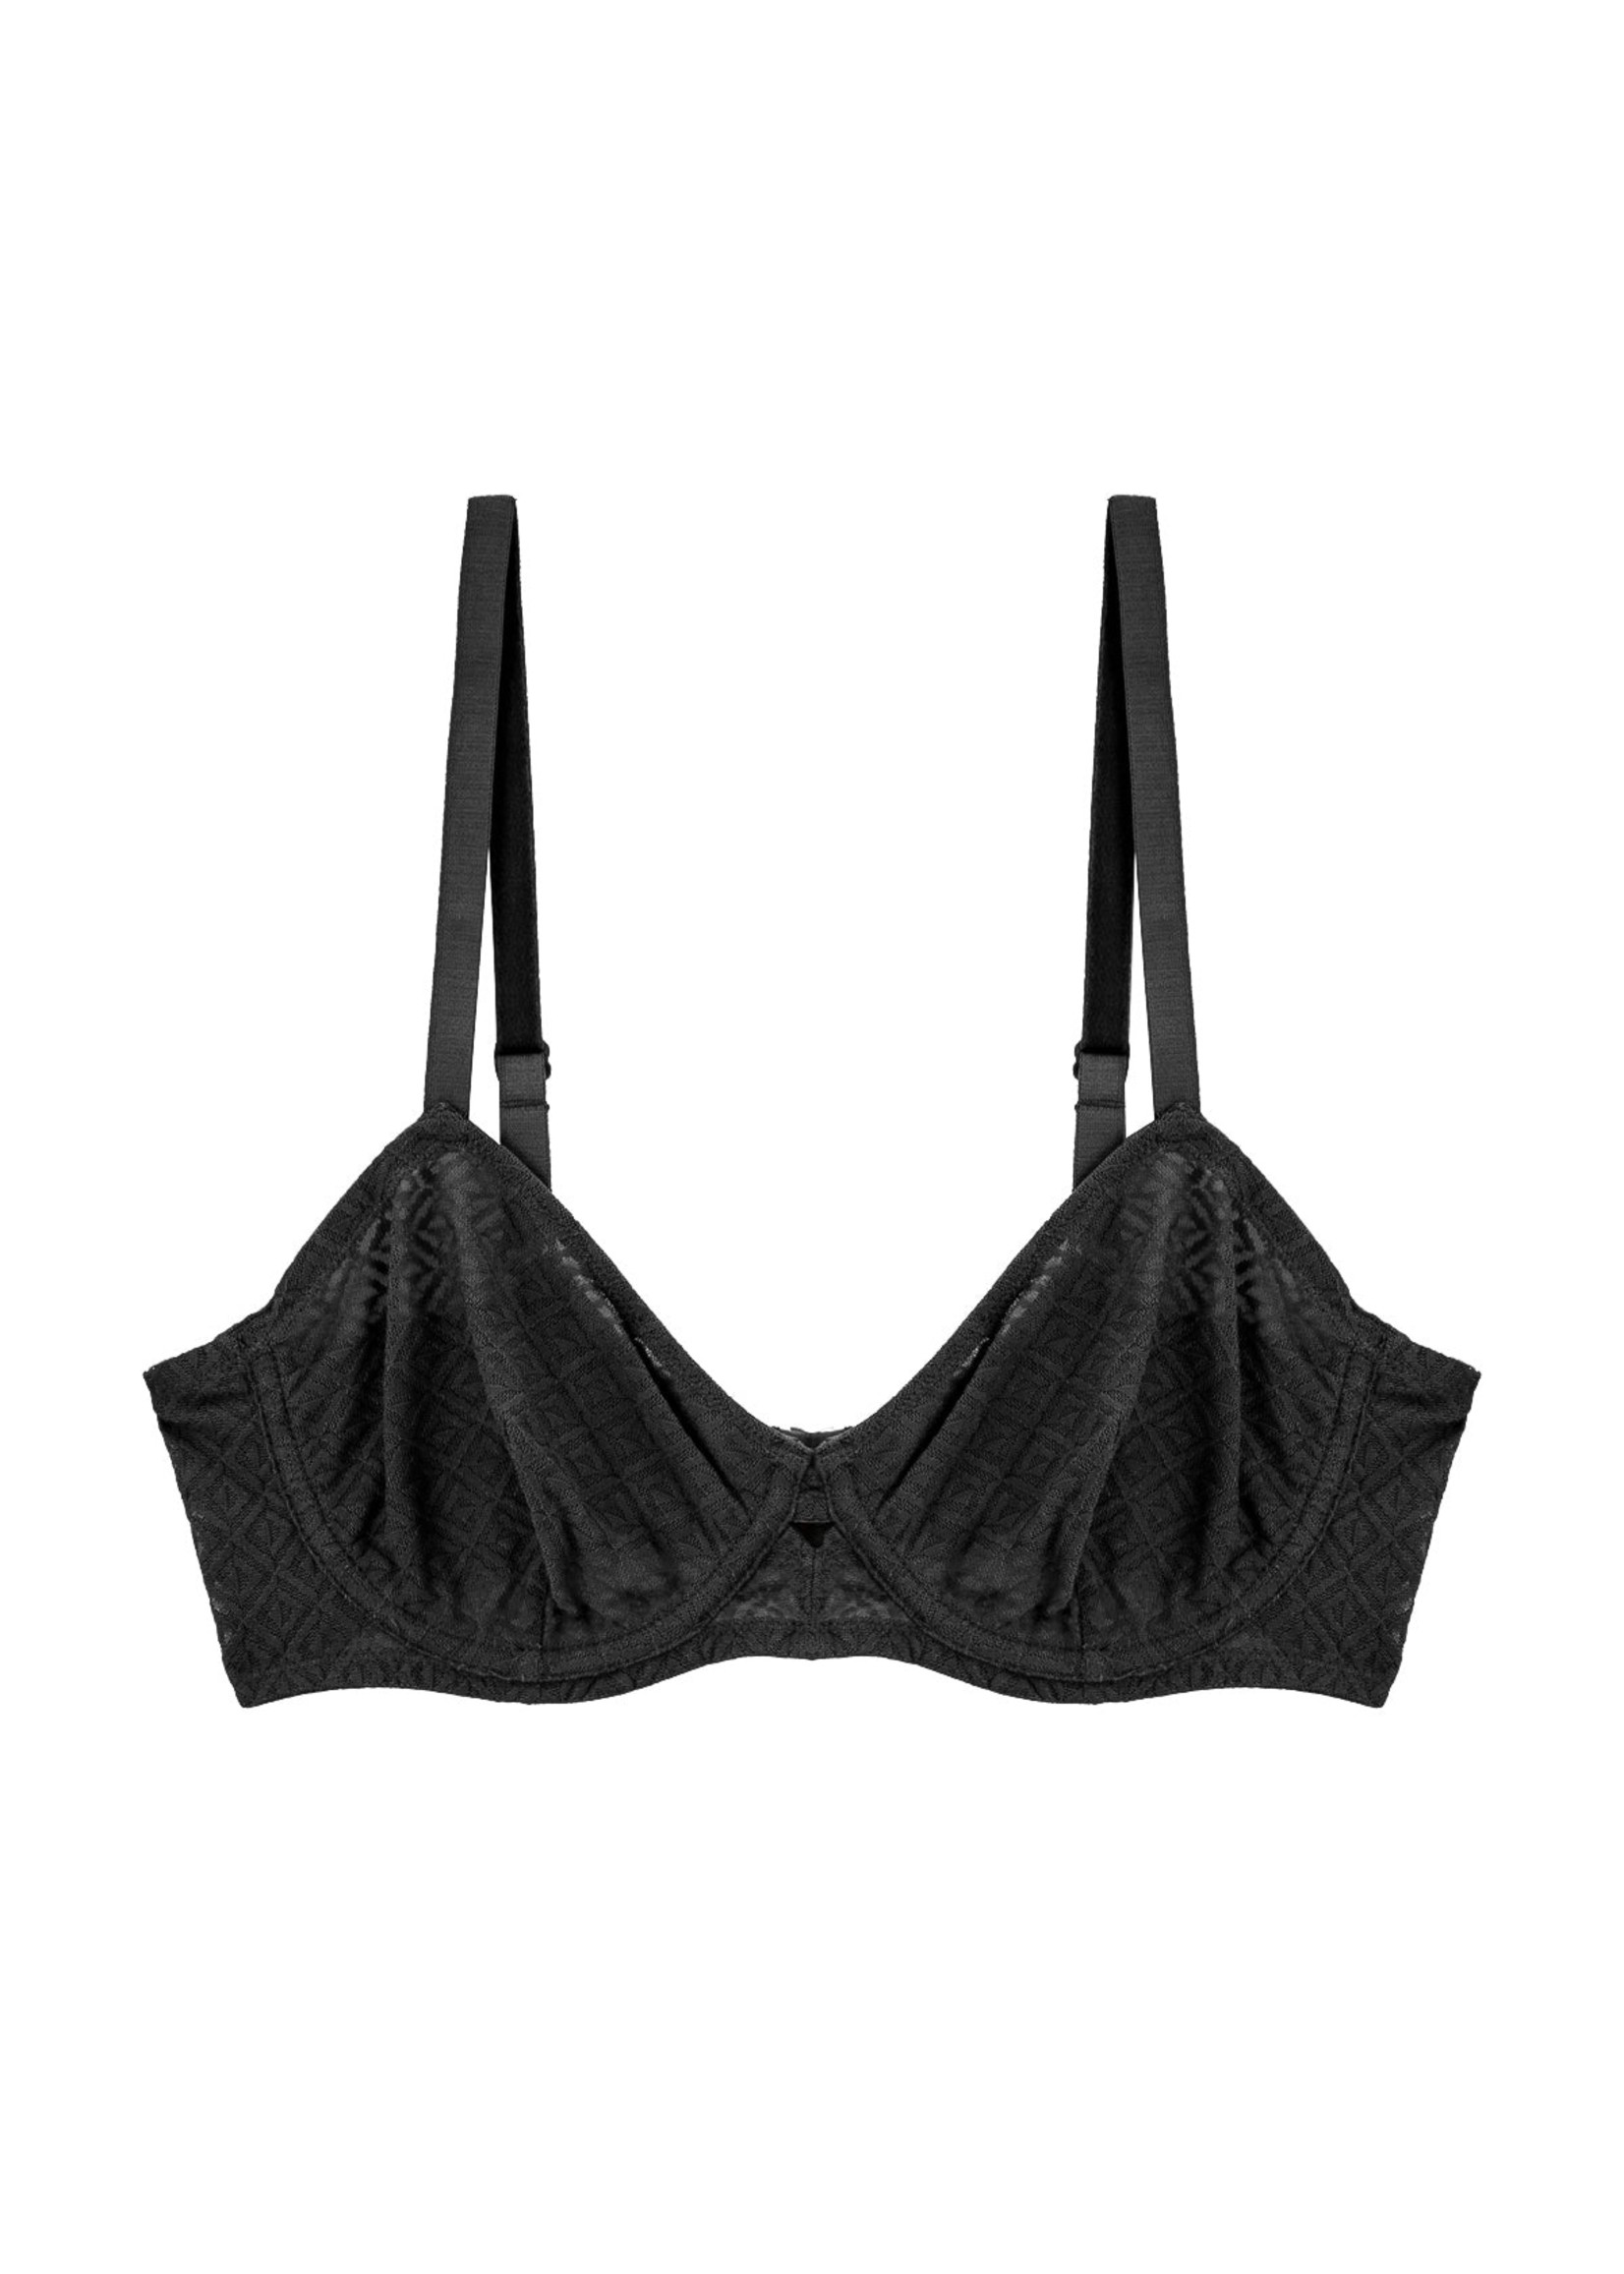 Else Betty Underwire Full Cup Bra